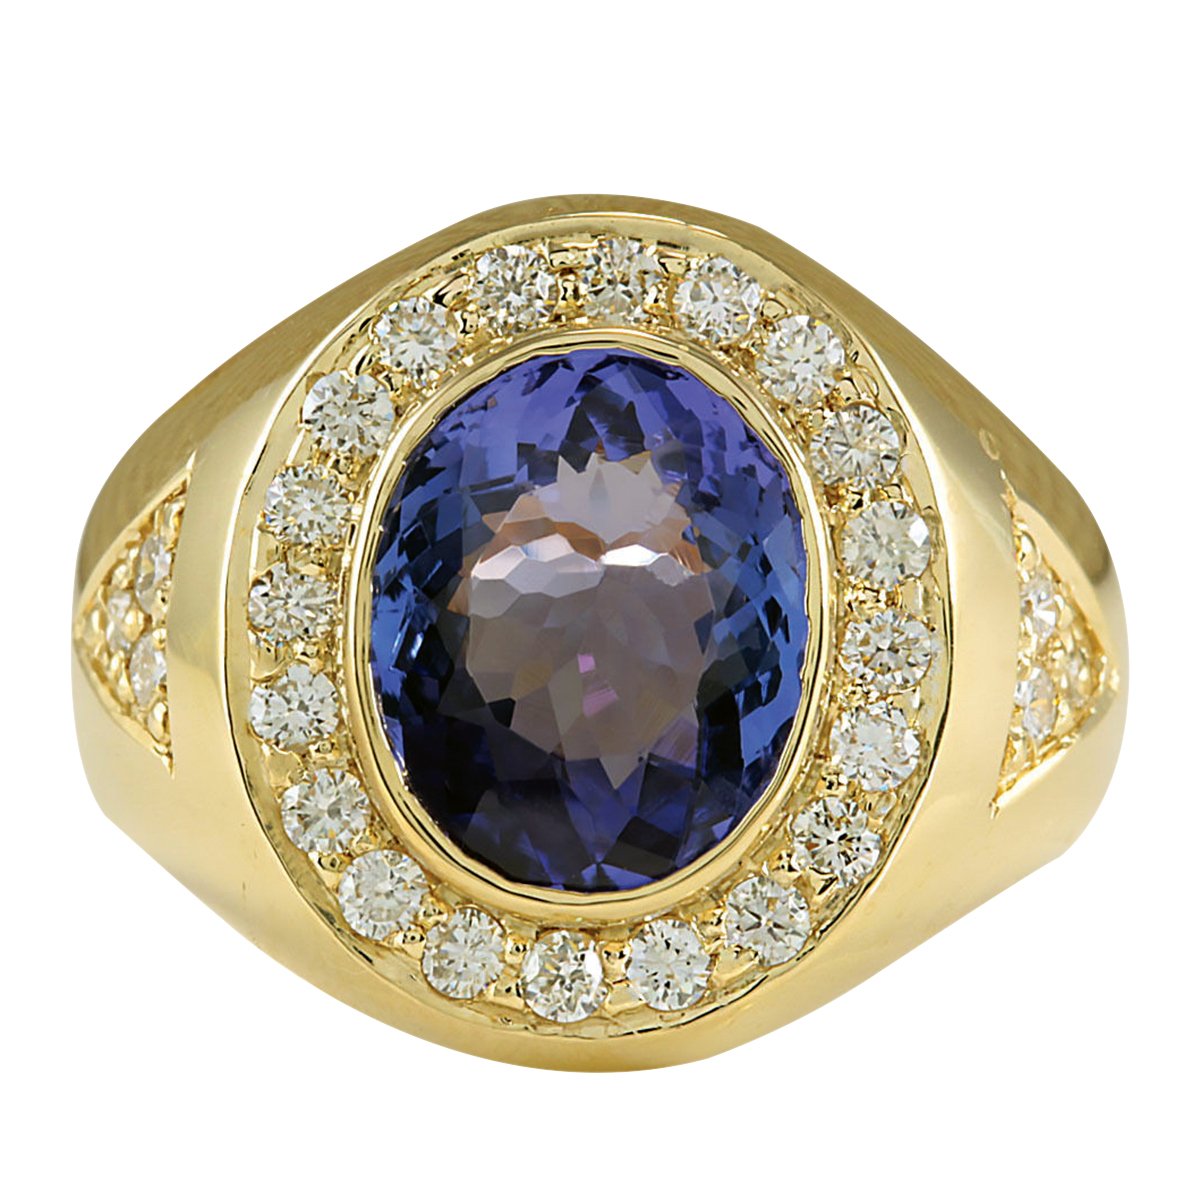 4.95 Carat Natural Blue Tanzanite and Diamond (F-G Color, VS1-VS2 Clarity) 14K Yellow Gold Luxury Statement Ring for Men Exclusively Handcrafted in USA